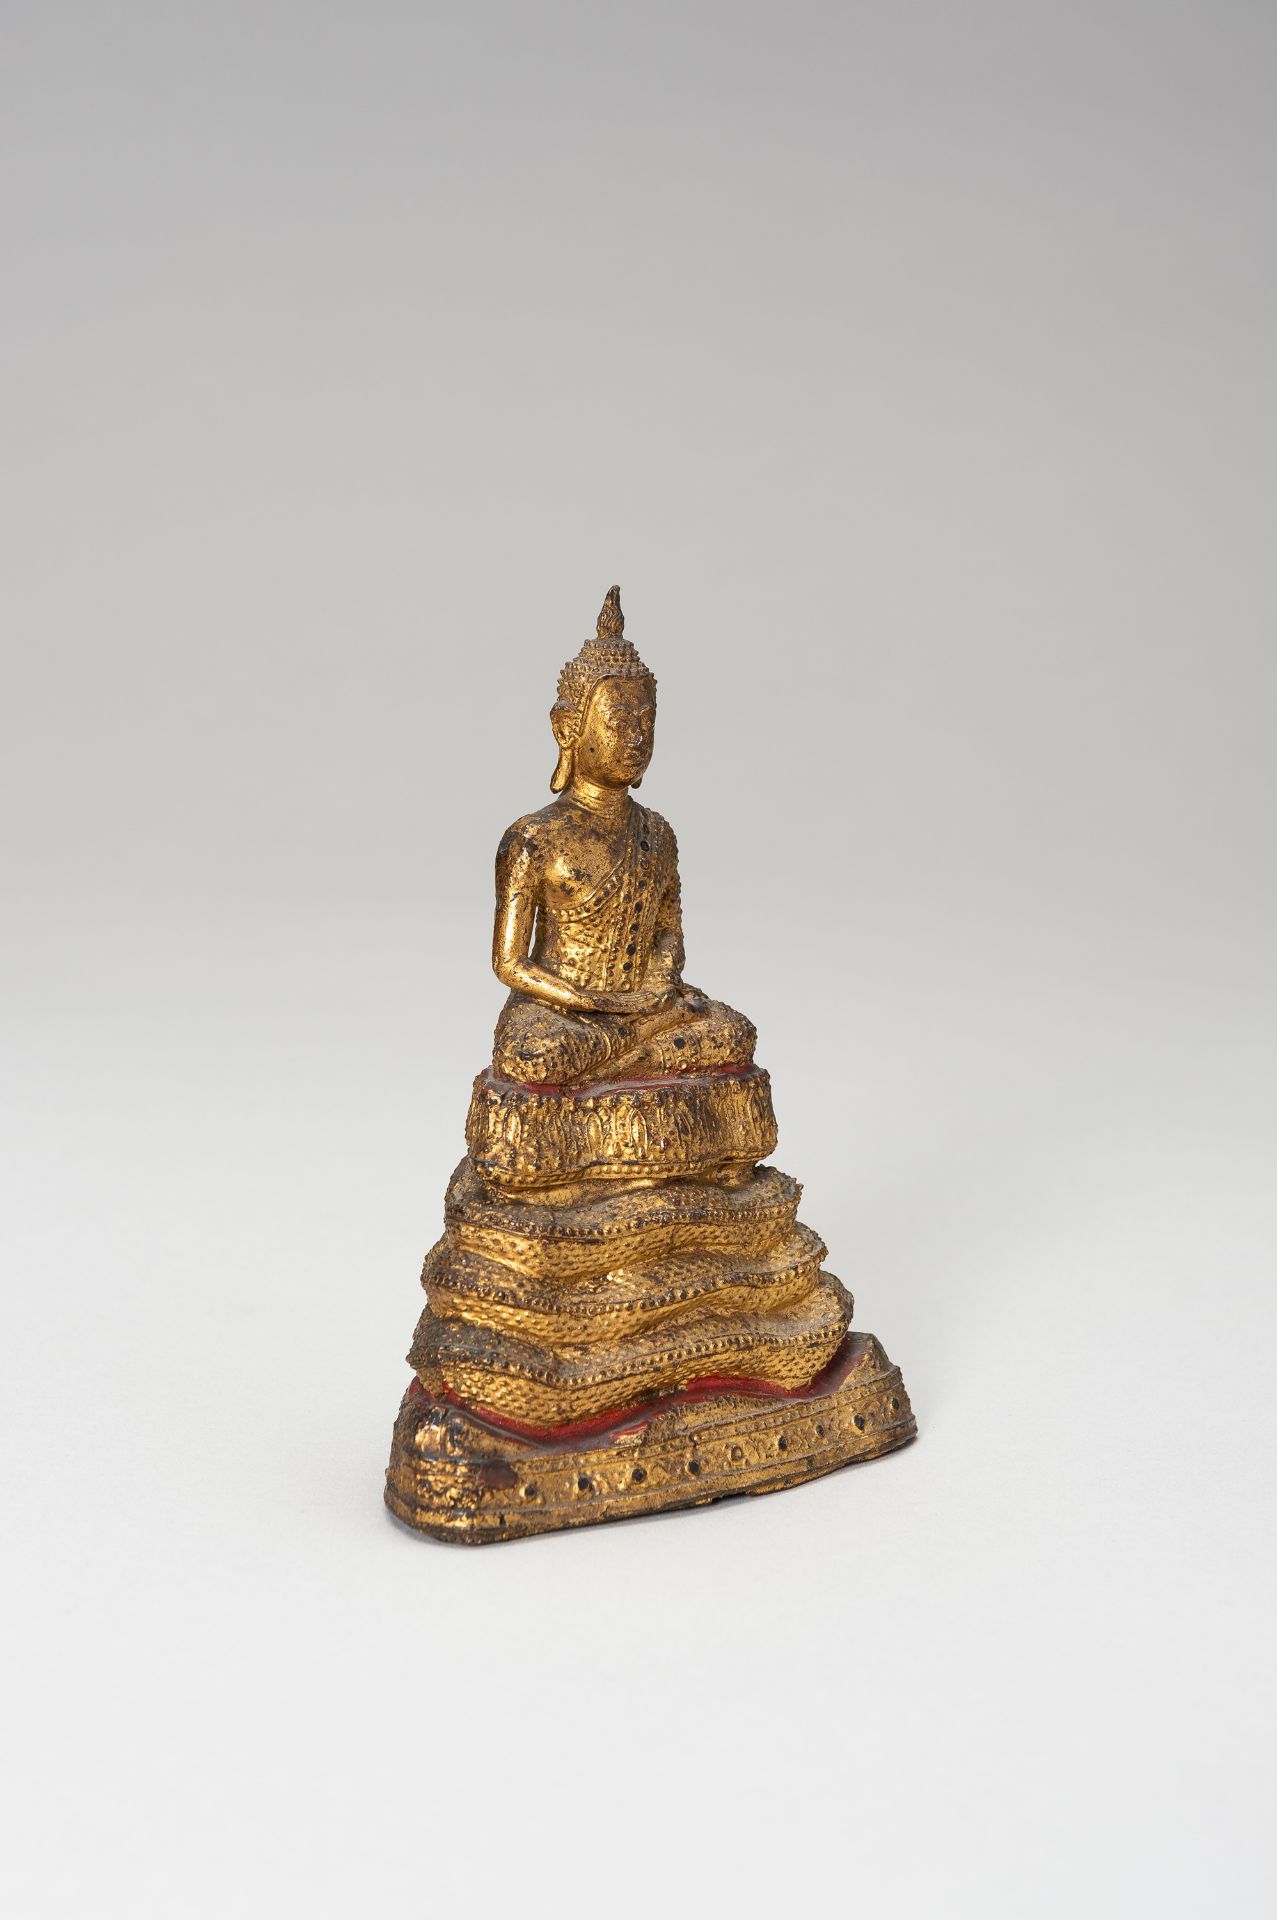 A SMALL LACQUER GILT BRONZE FIGURE OF A SEATED BUDDHA - Image 5 of 9